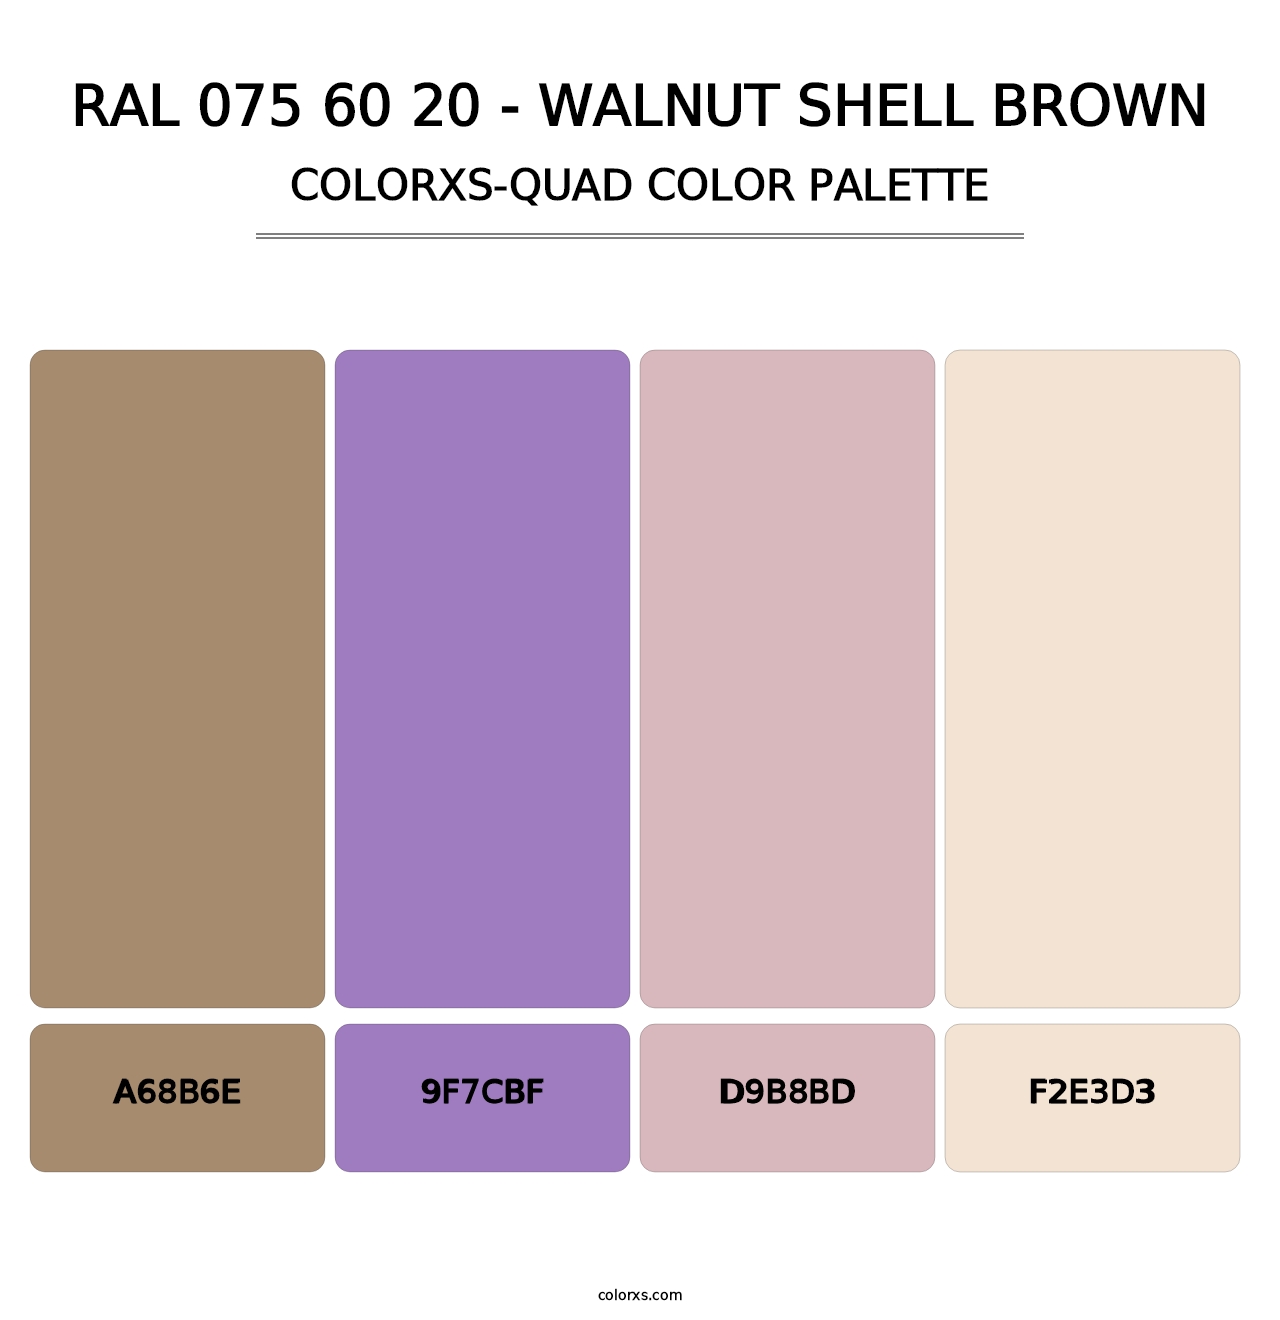 RAL 075 60 20 - Walnut Shell Brown - Colorxs Quad Palette